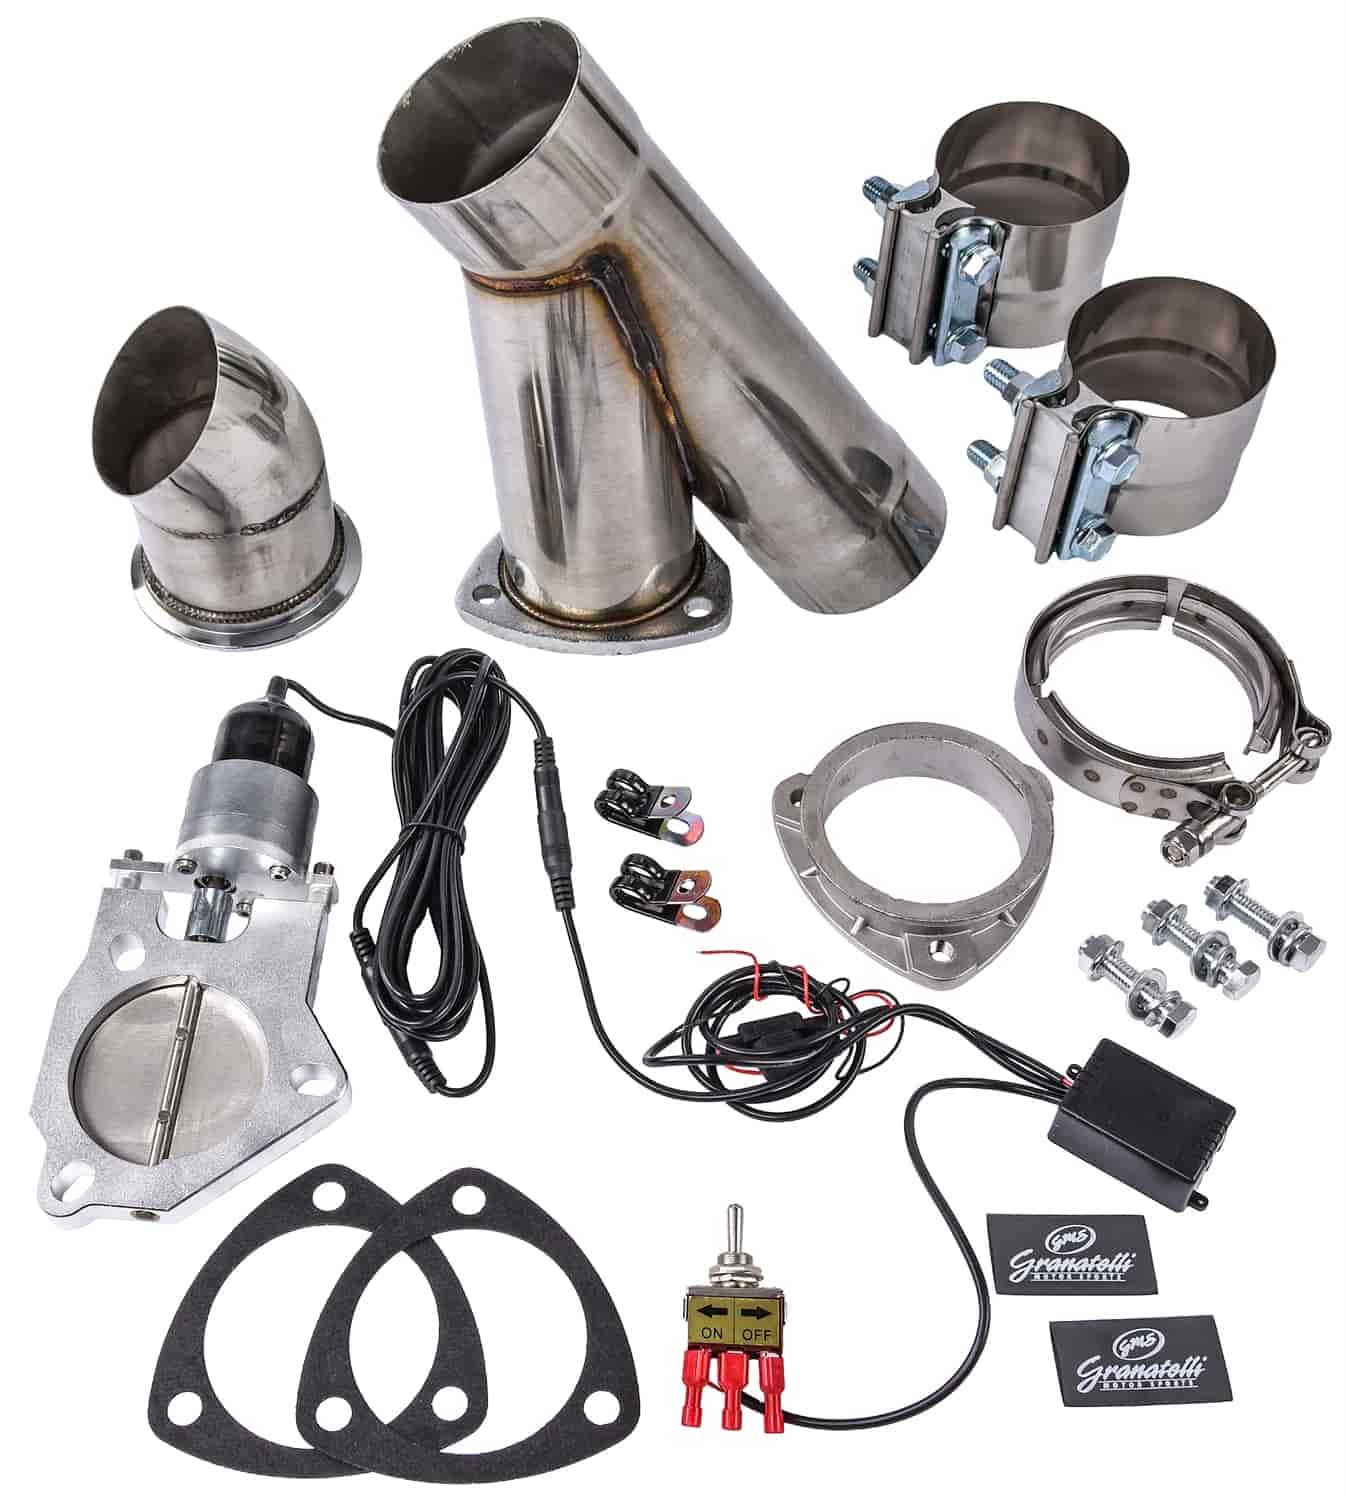 Electronic Stainless Steel Exhaust Cutout System for 4 in. Single Exhaust (Slip-Fit)